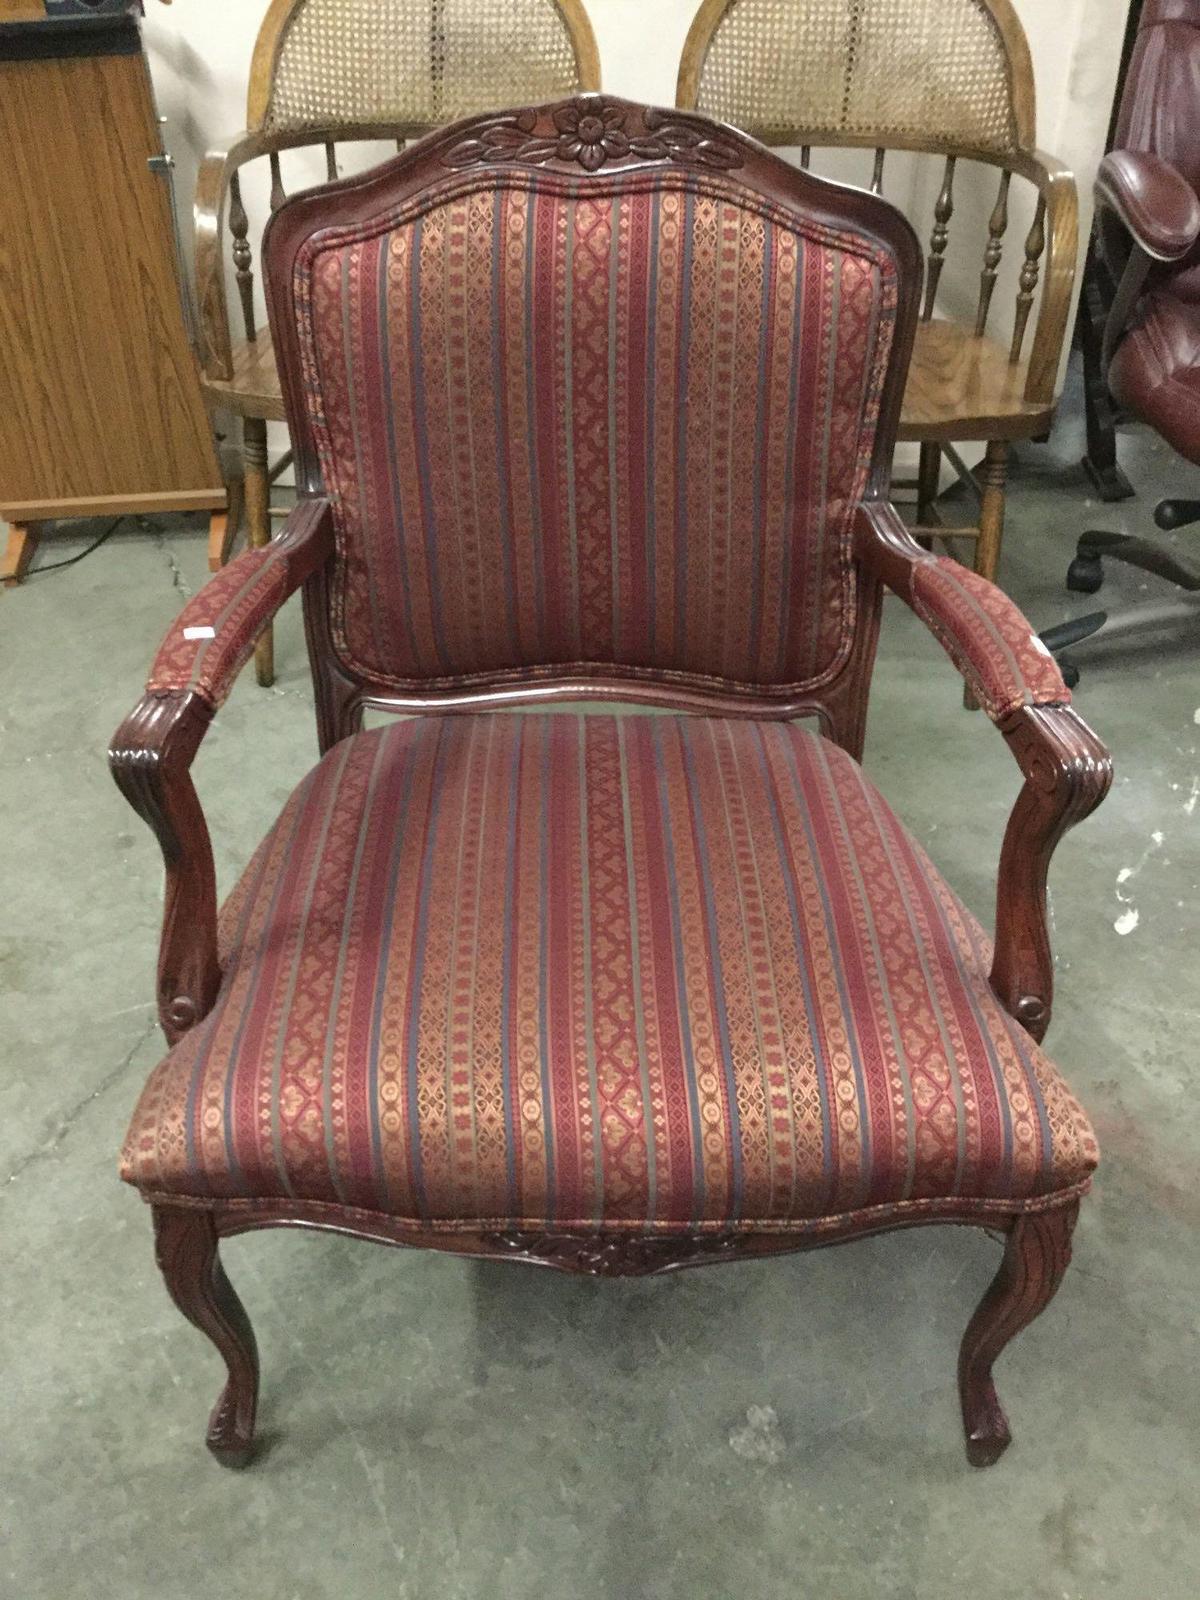 vintage 40's wood and upholstey inspired parlor armchair with Chippendale influence